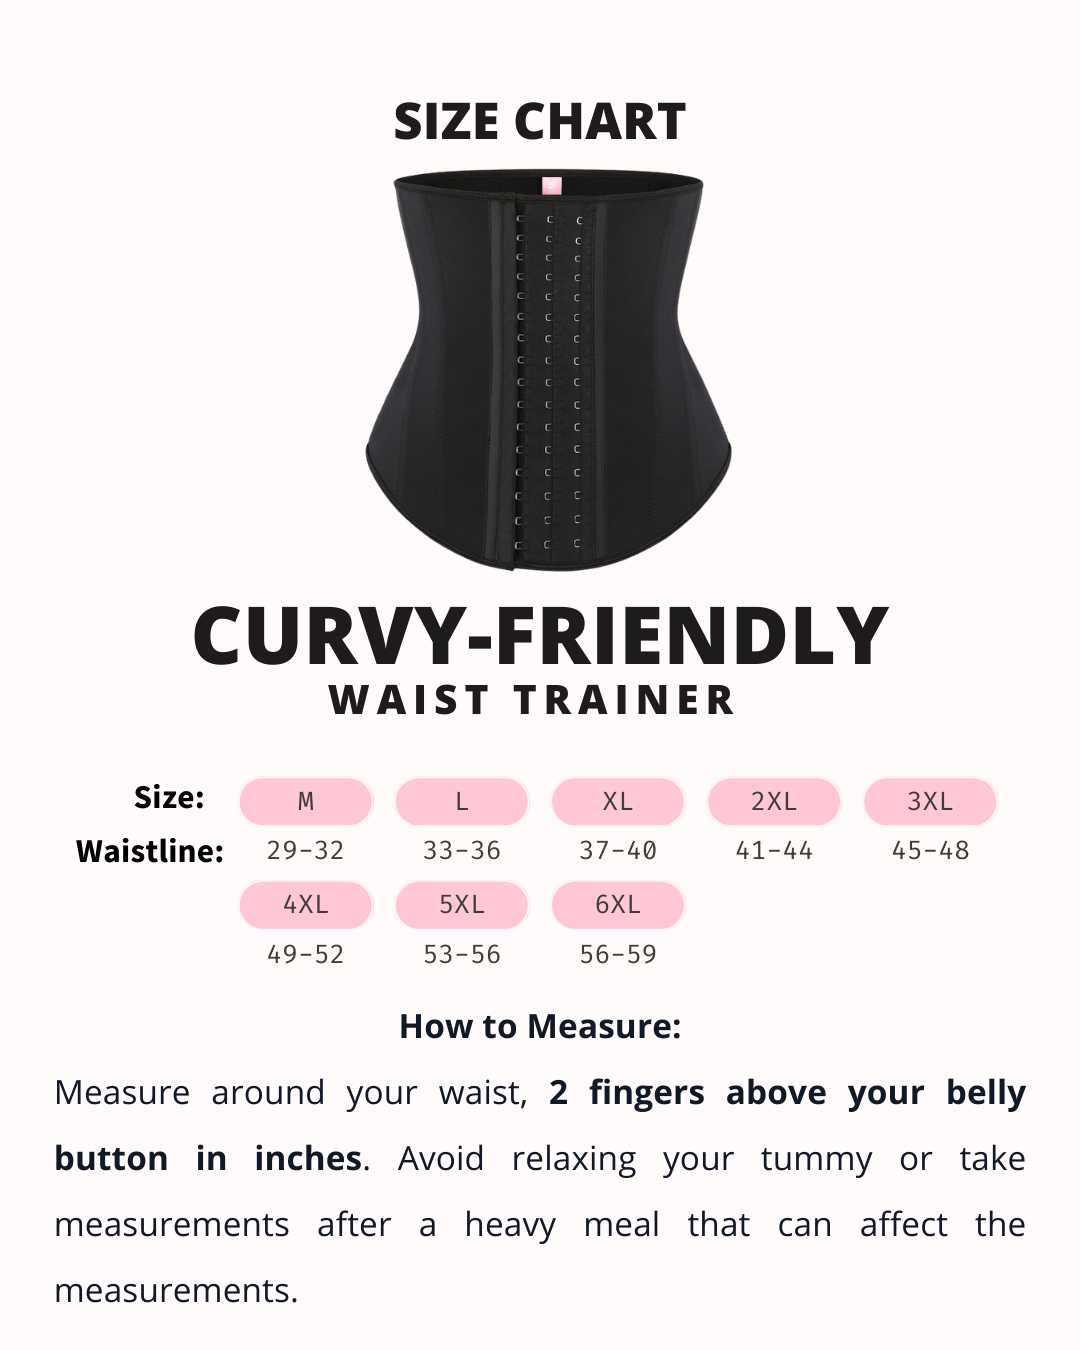 Curvy Friendly waist trainer designed for pear shaped women size chart for M to 6XL, and how to measure effectively